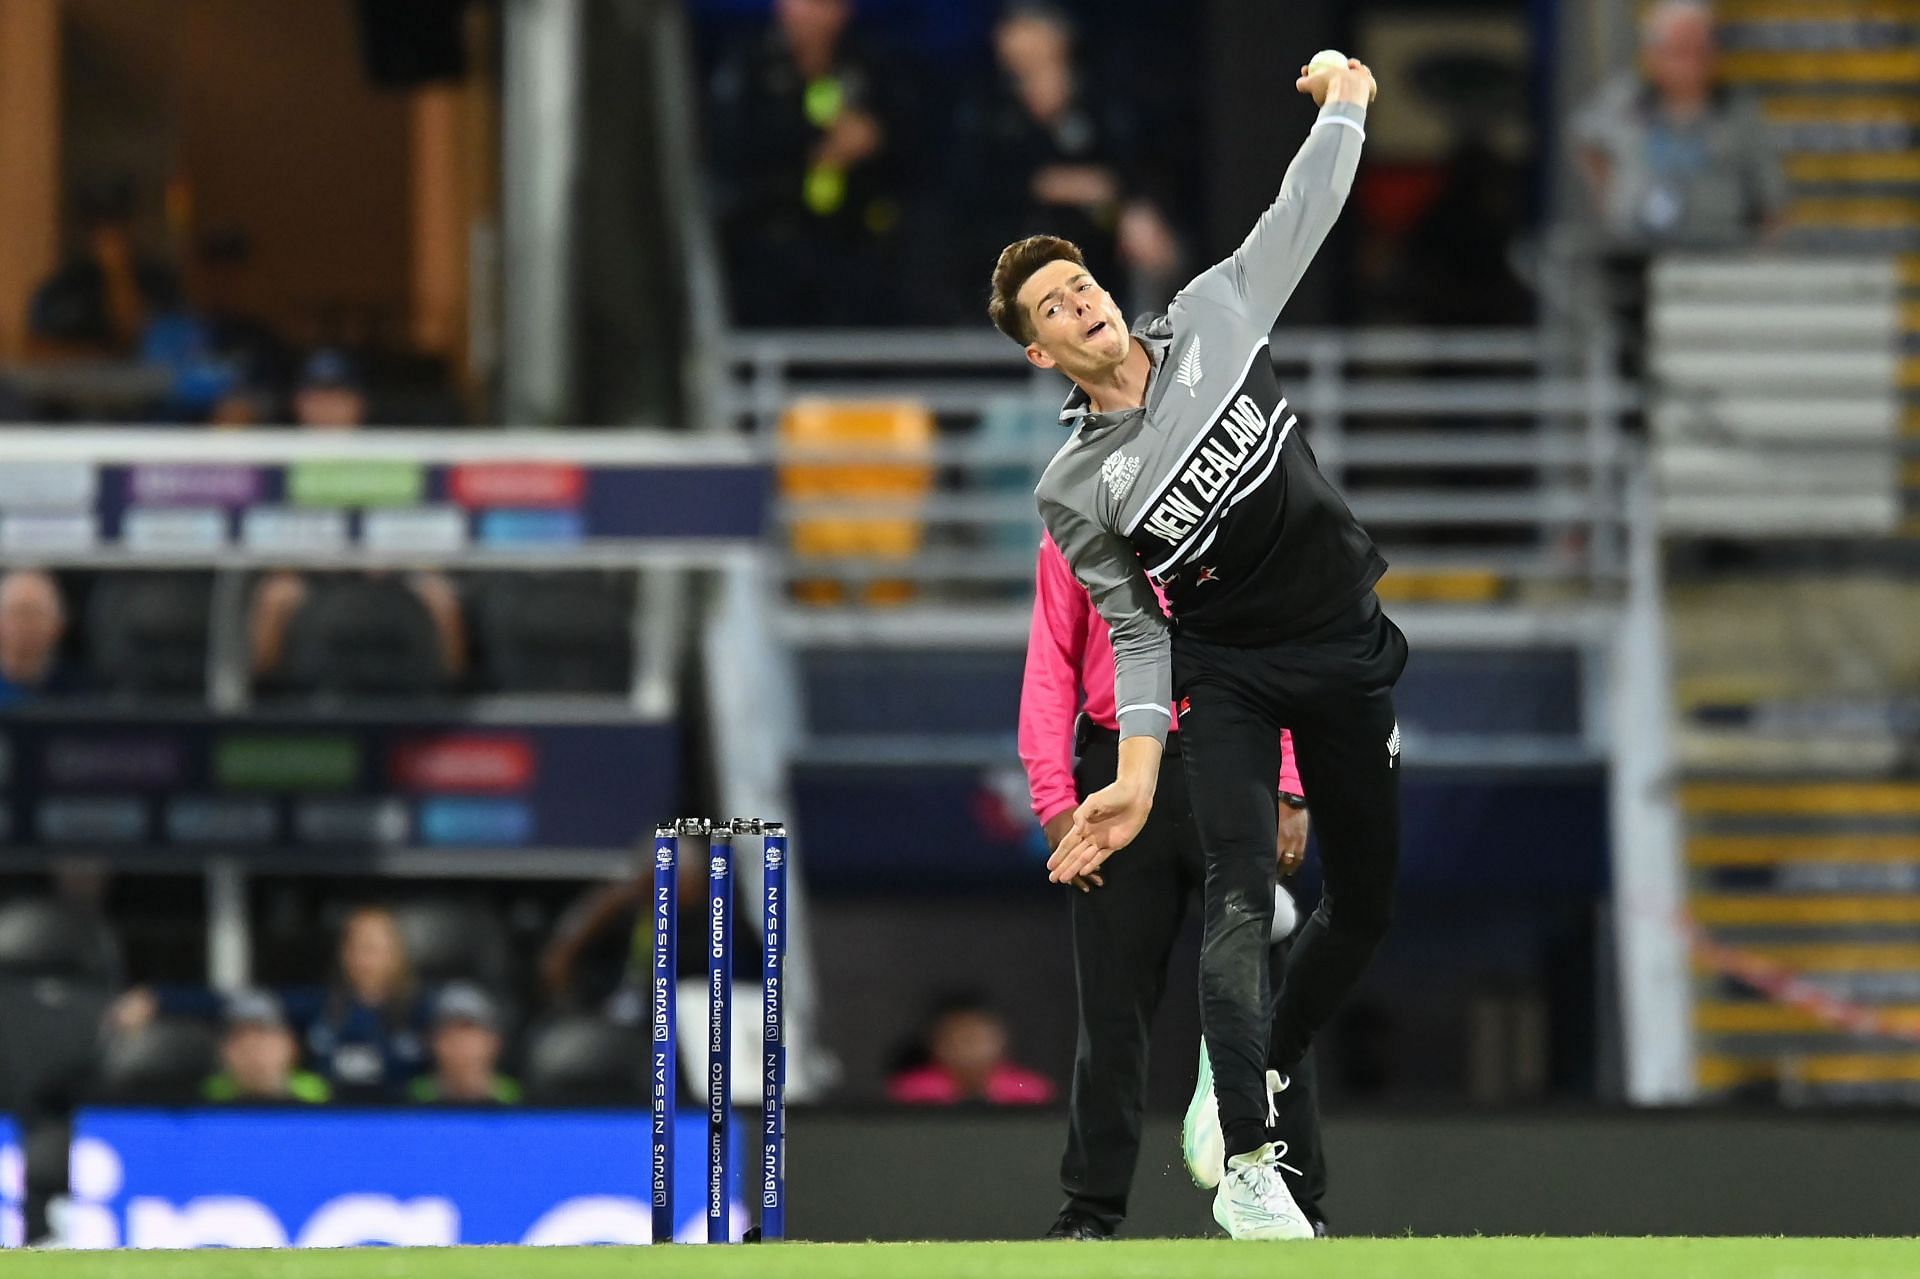 Mitchell Santner is New Zealand&#039;s highest wicket-taker in the ongoing T20 World Cup.